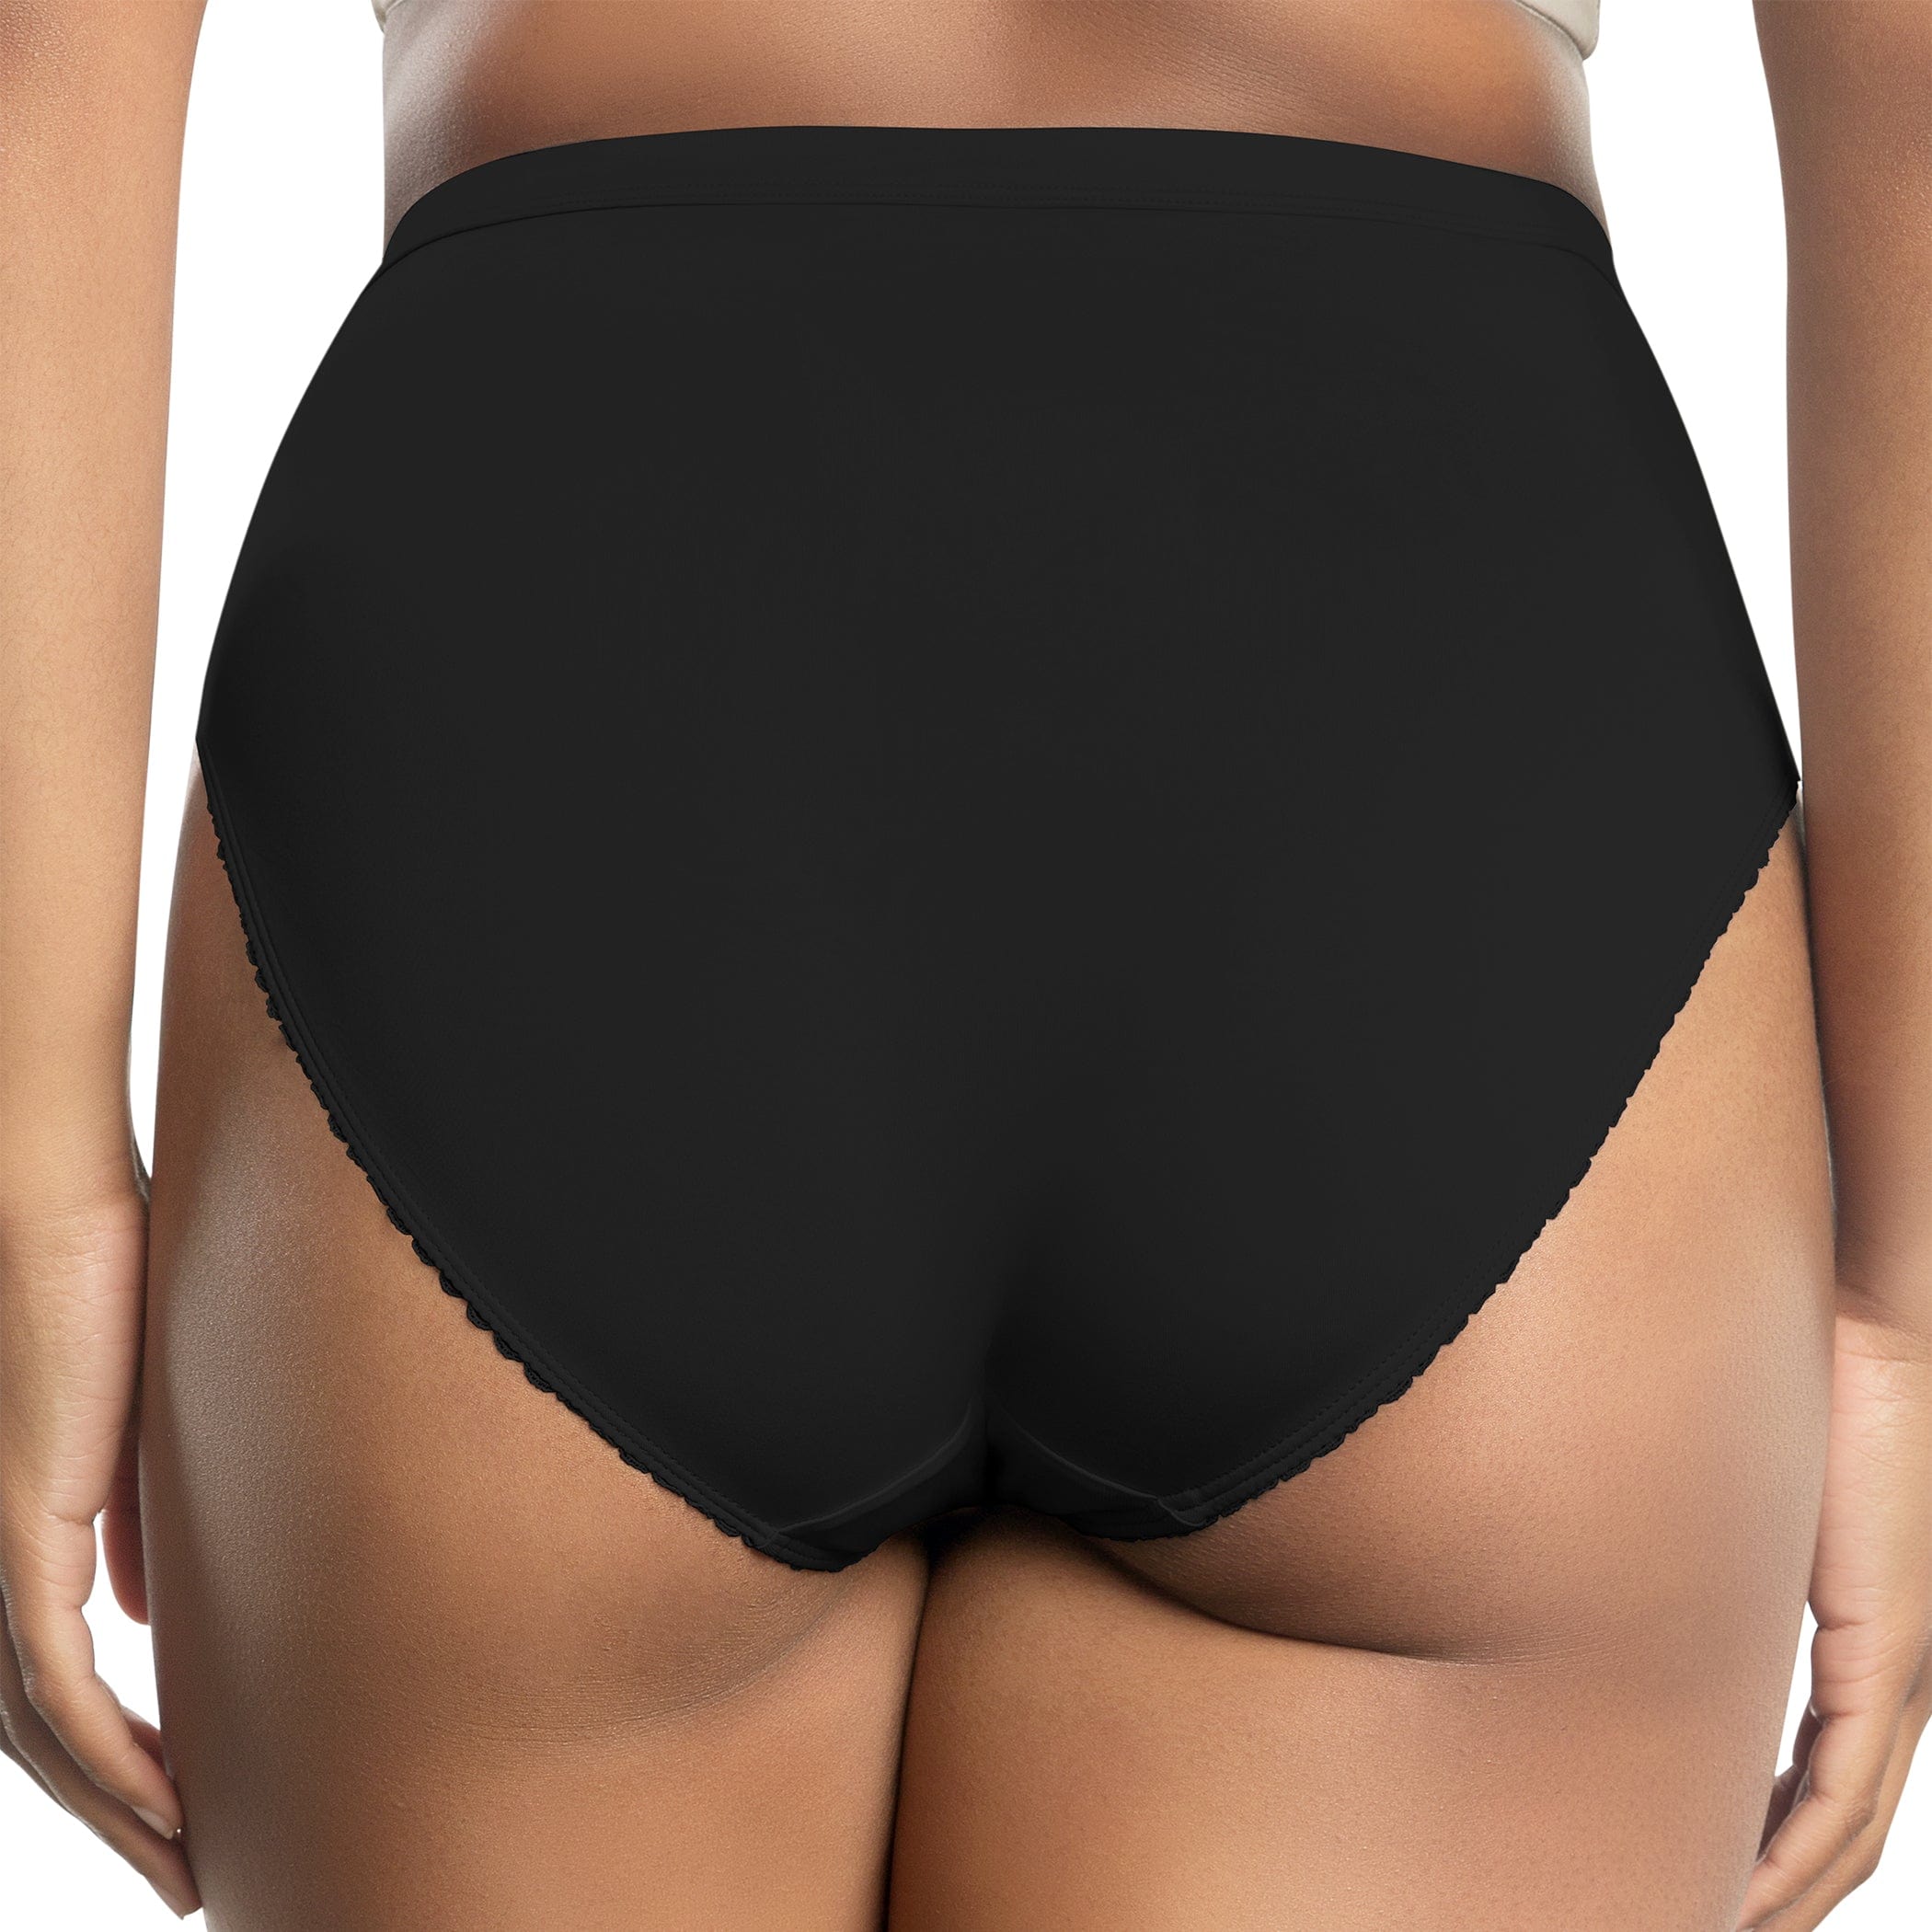  SGJHEQ Panties for Women French Cut Womens Sexy And